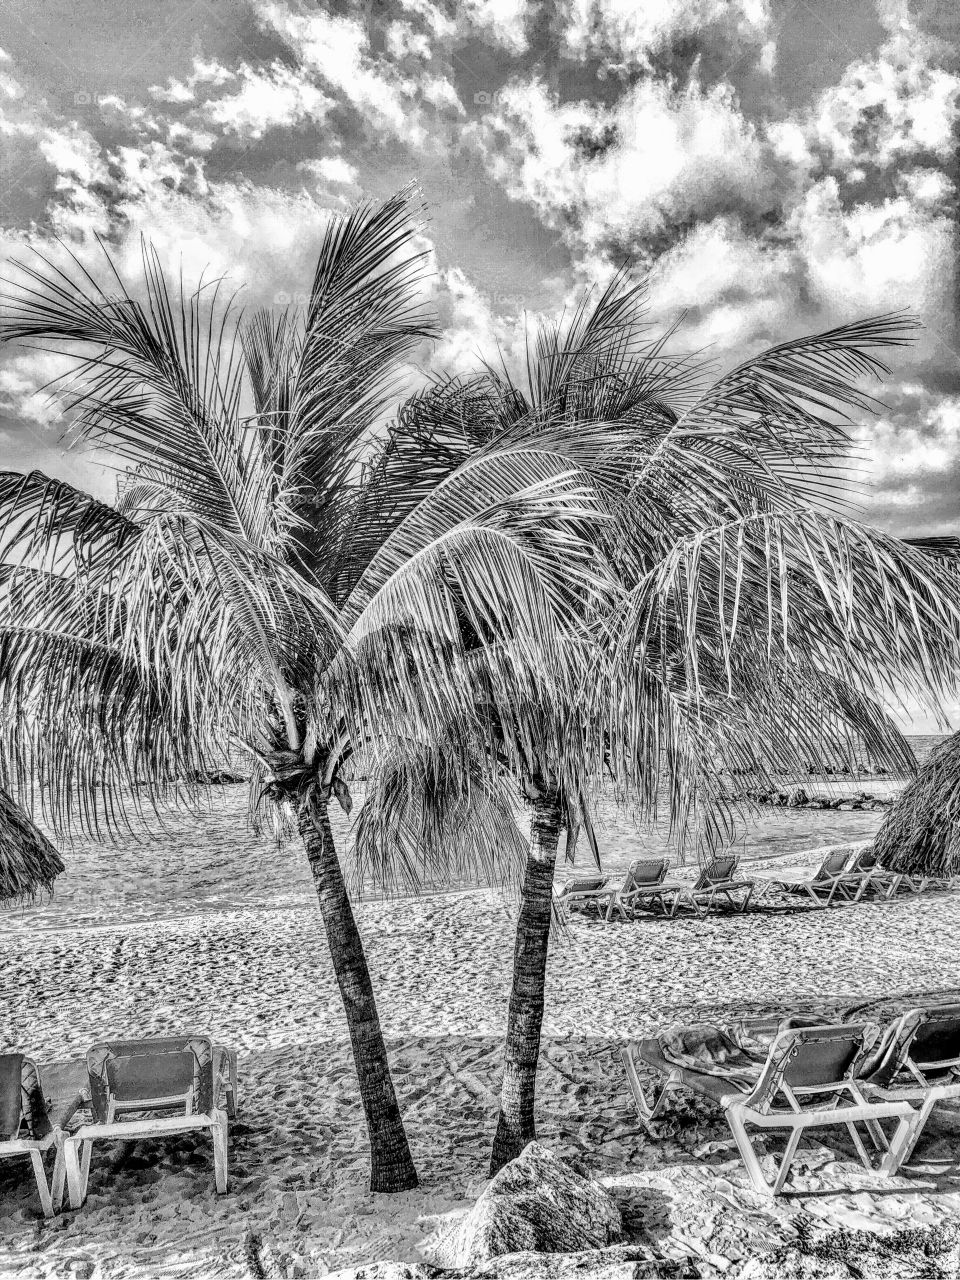 Palm trees and beach in black and white